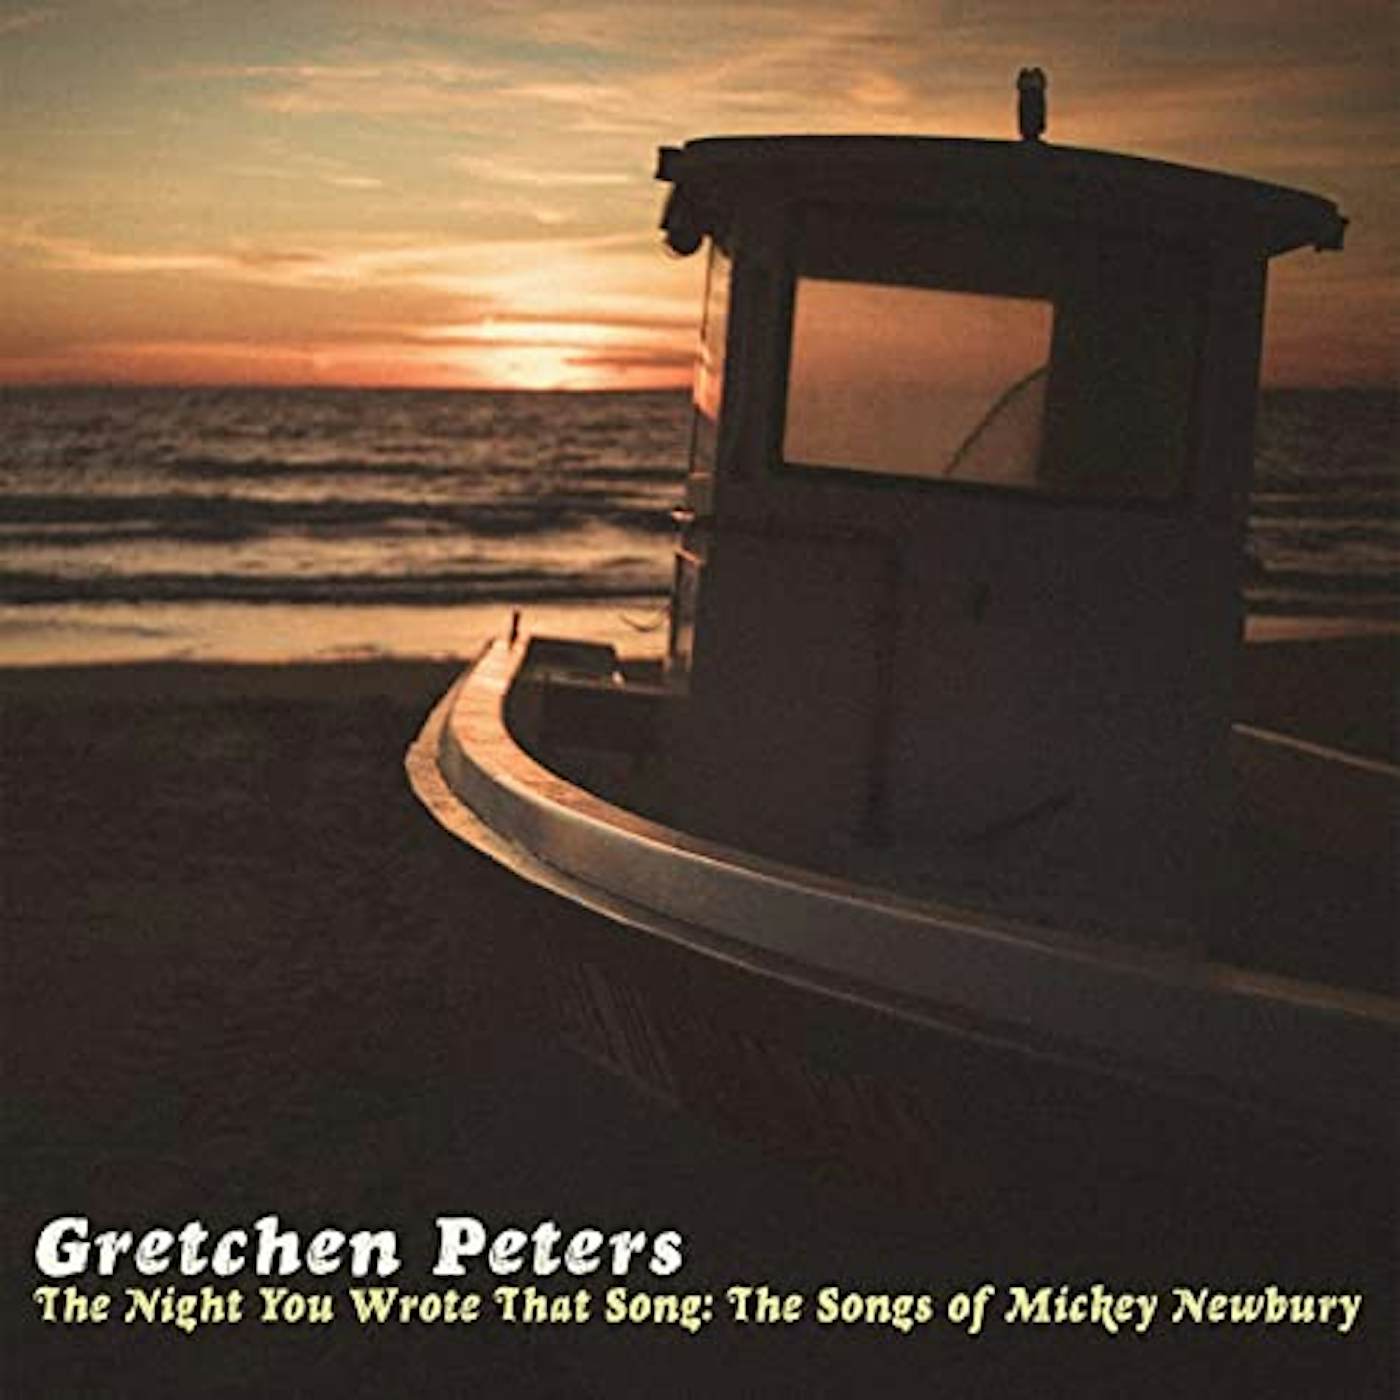 Gretchen Peters NIGHT YOU WROTE THAT SONG: SONGS OF MICKEY NEWBURY Vinyl Record